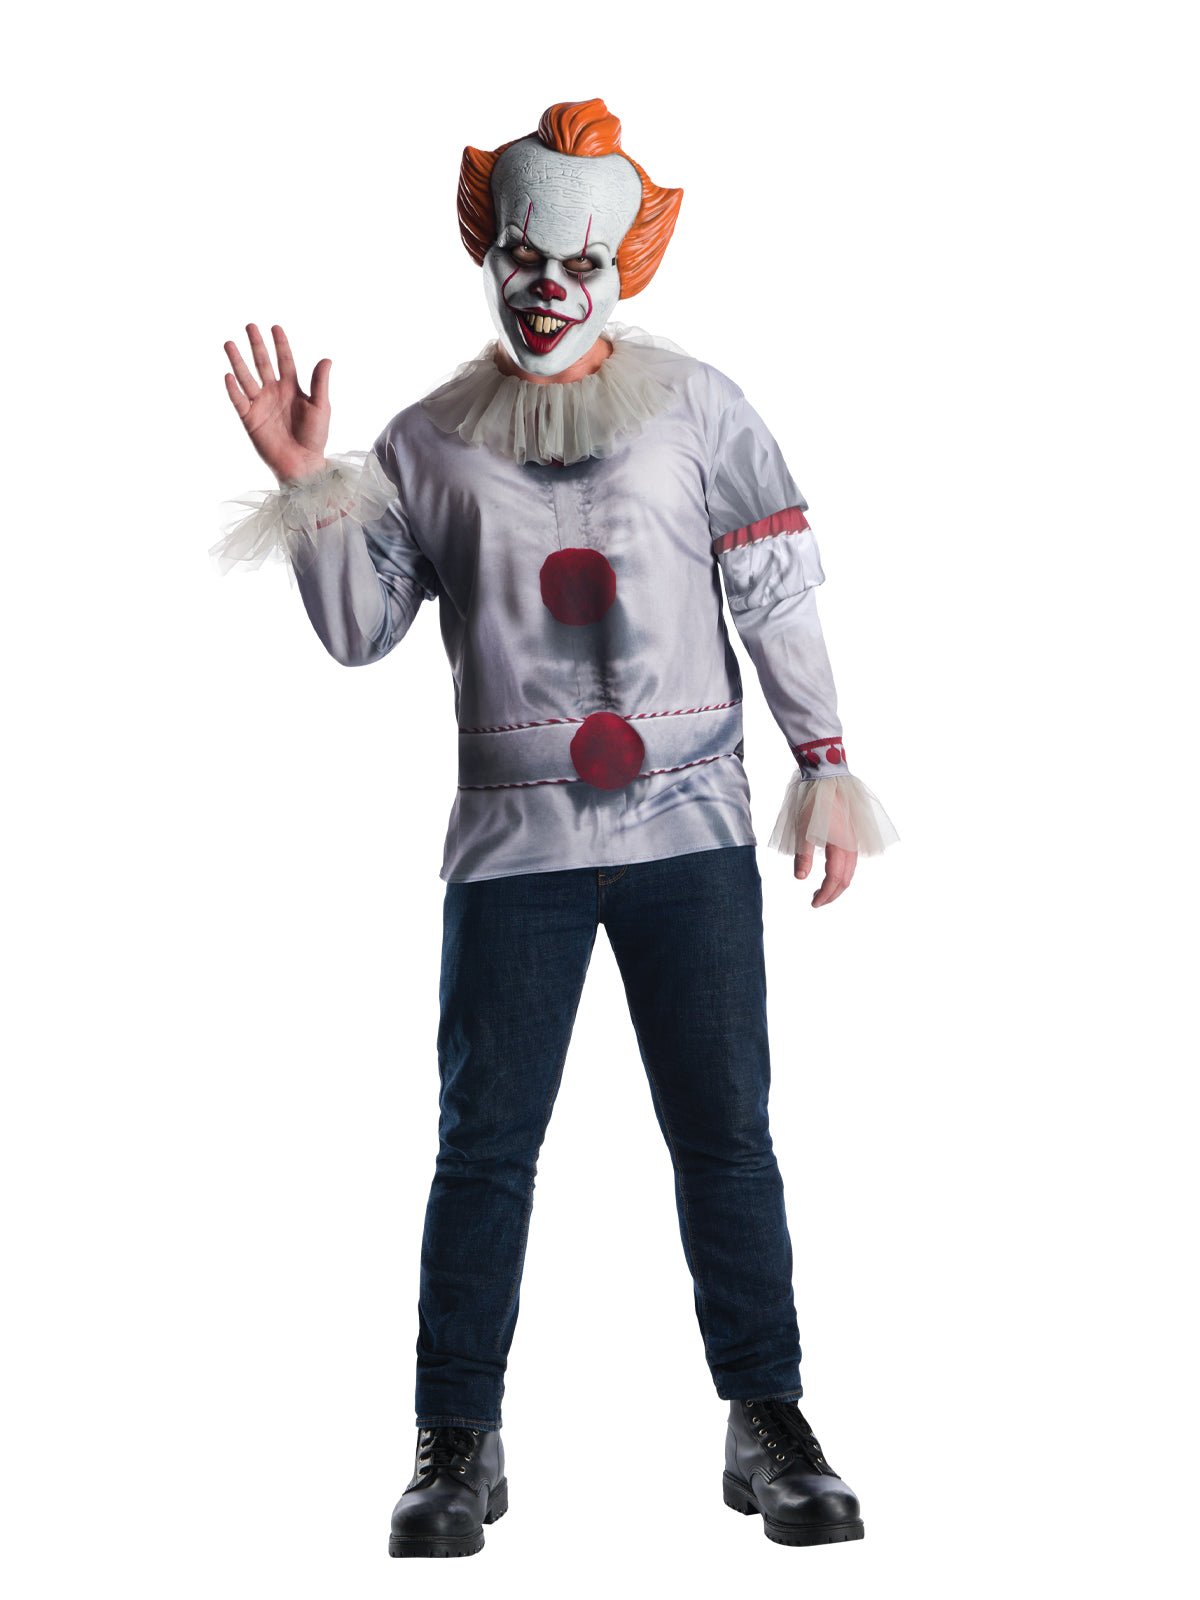 Pennywise 'It' Costume Top Adult